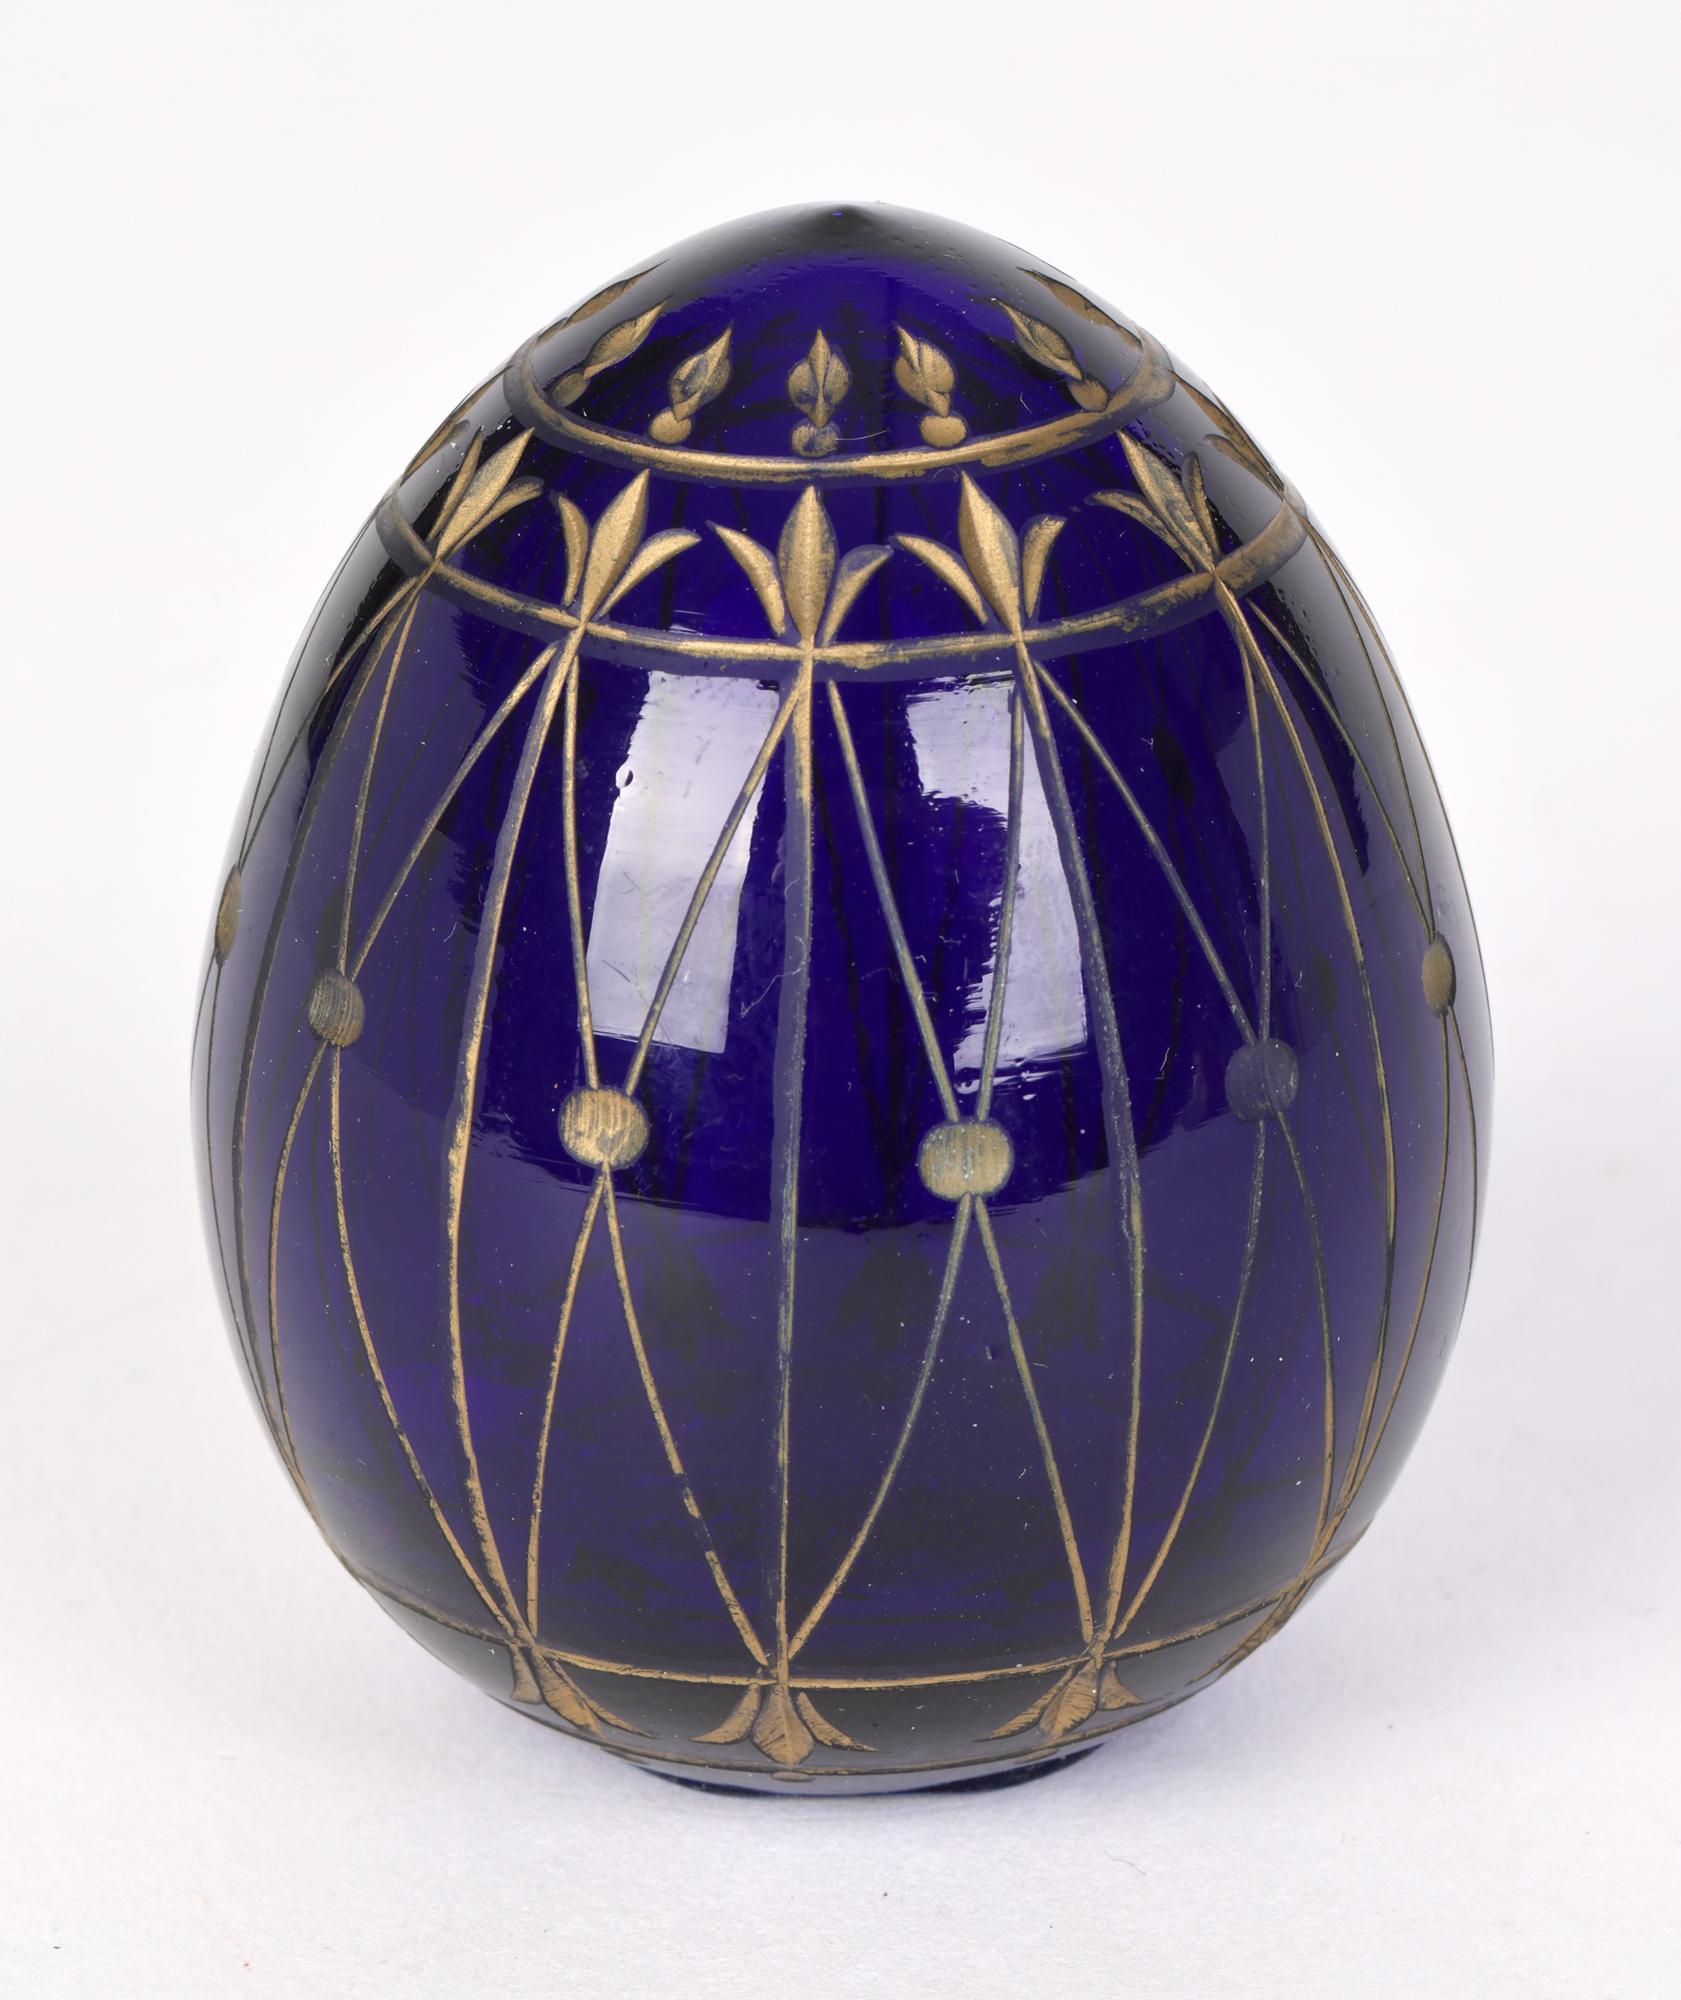 Russian Blue Glass Egg with Engraved Designs Faberge Label 4